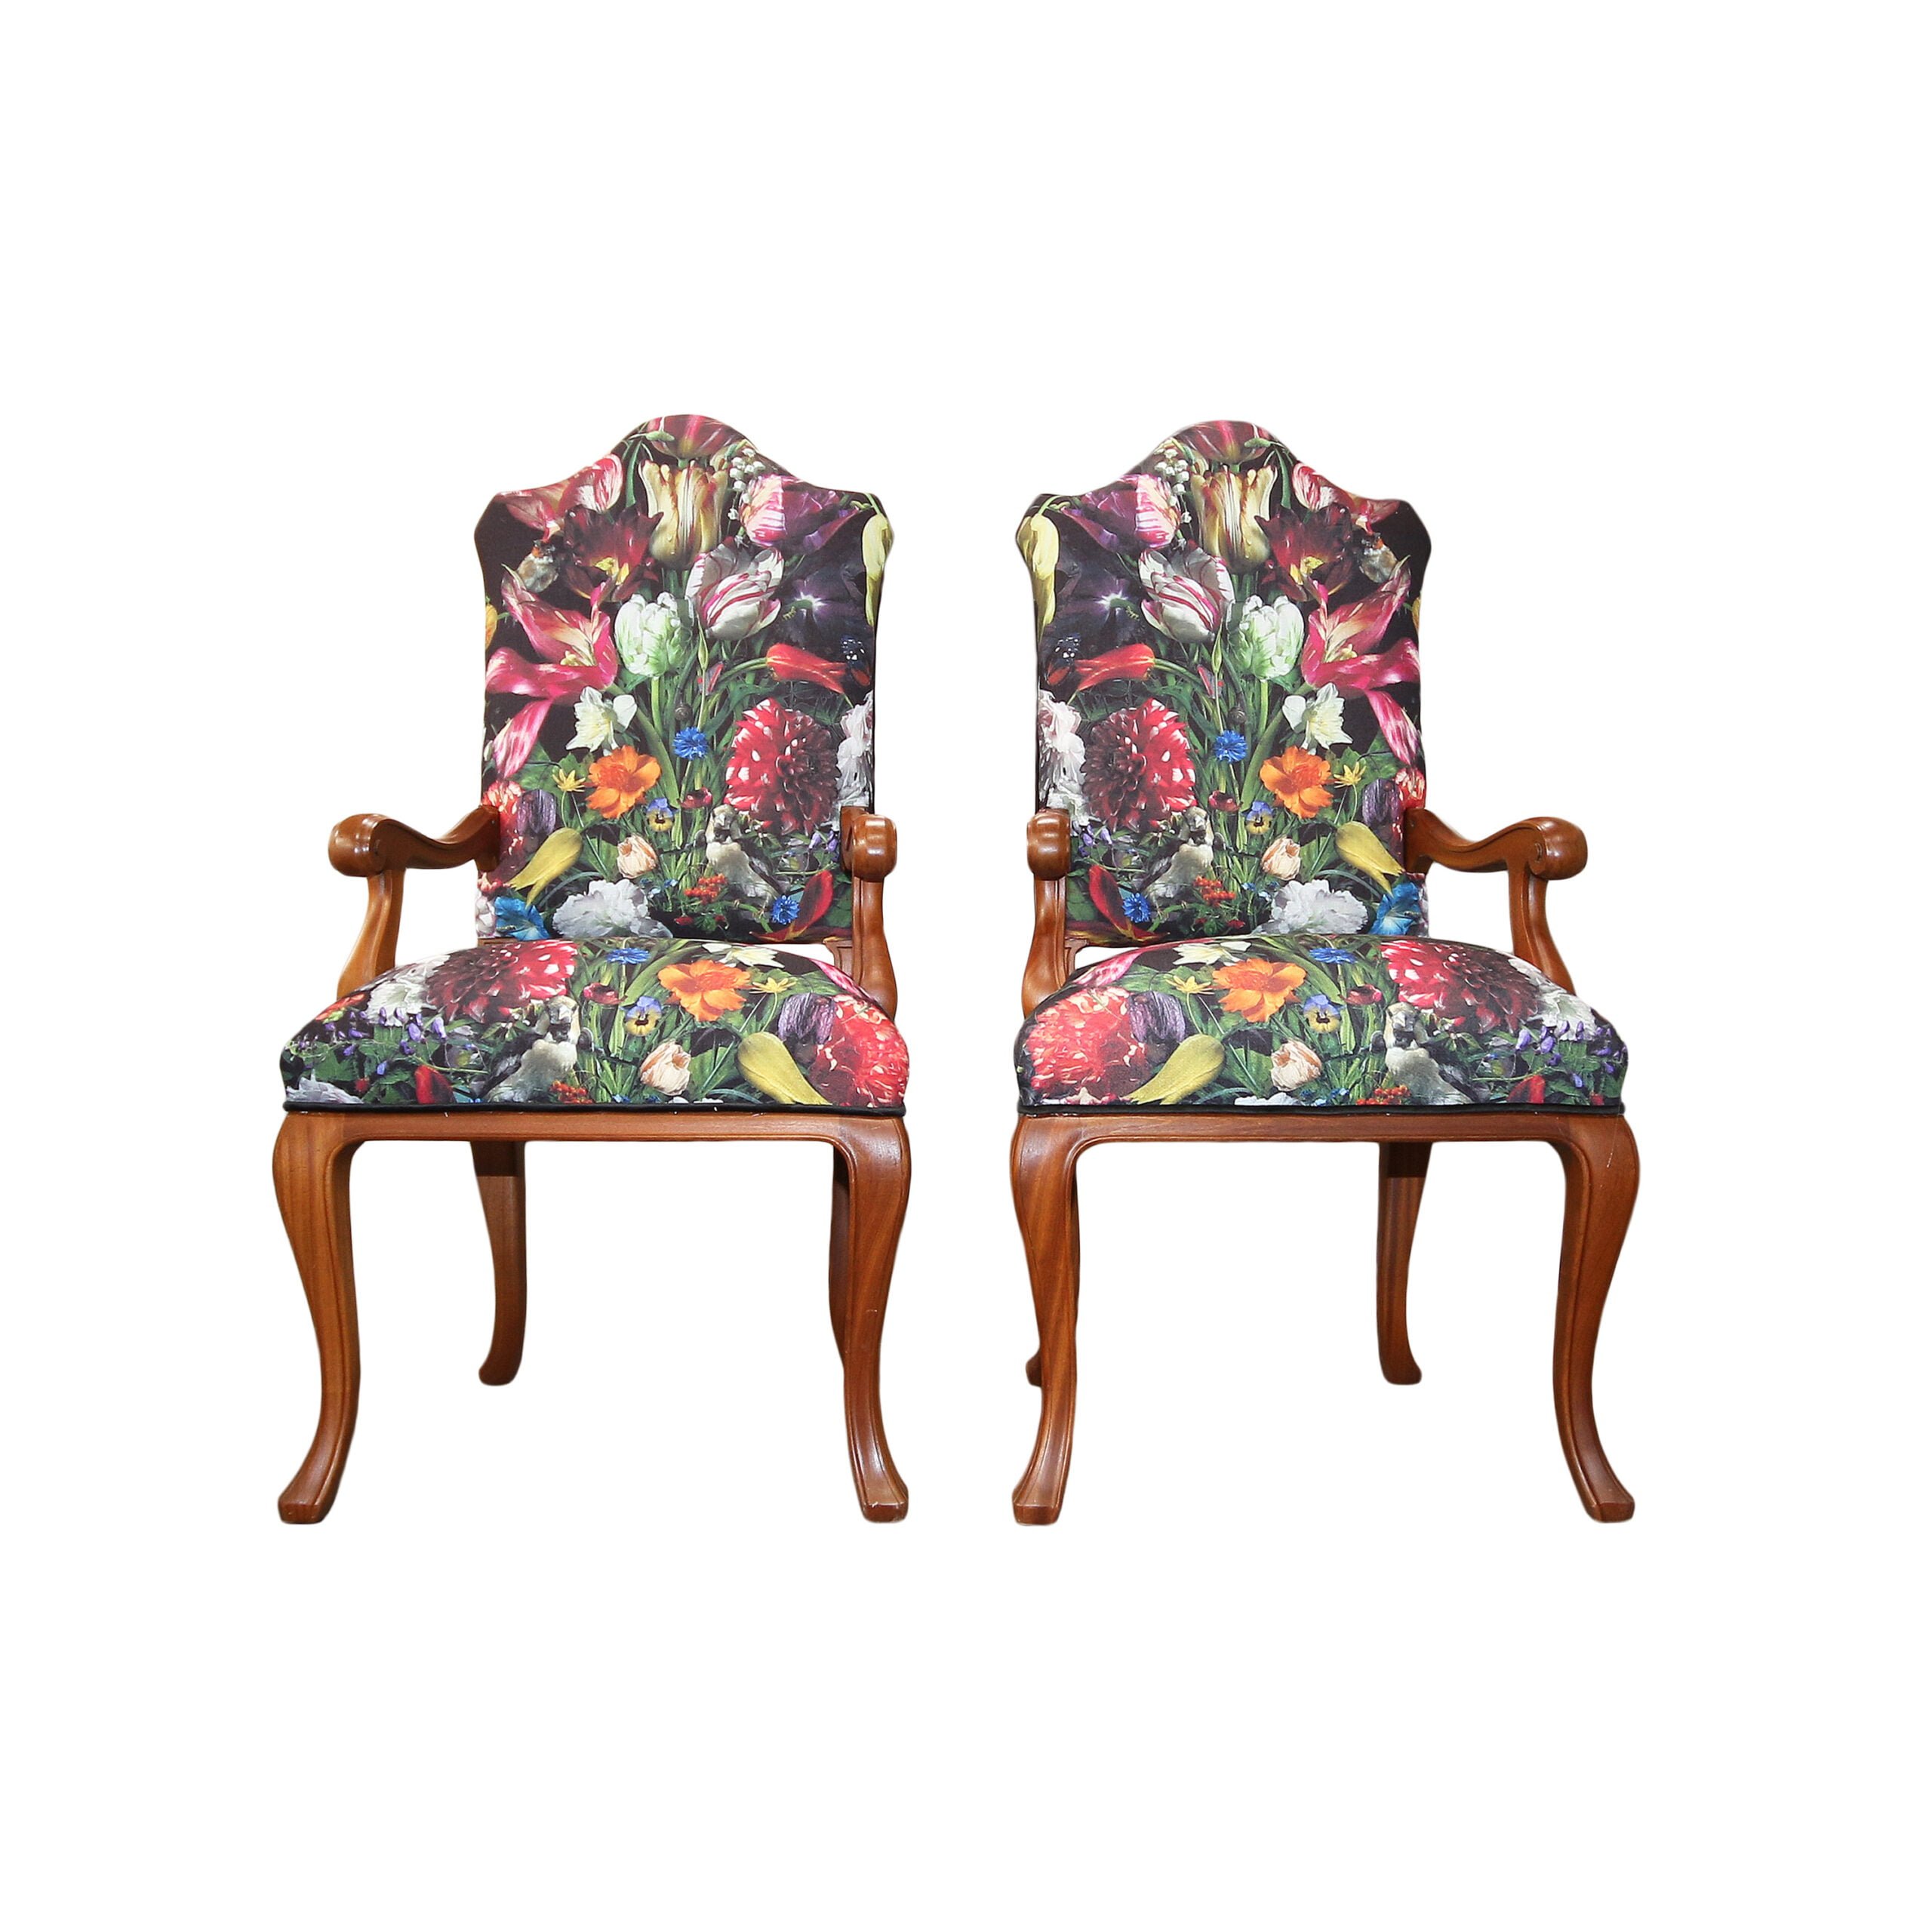 Floral high back chairs